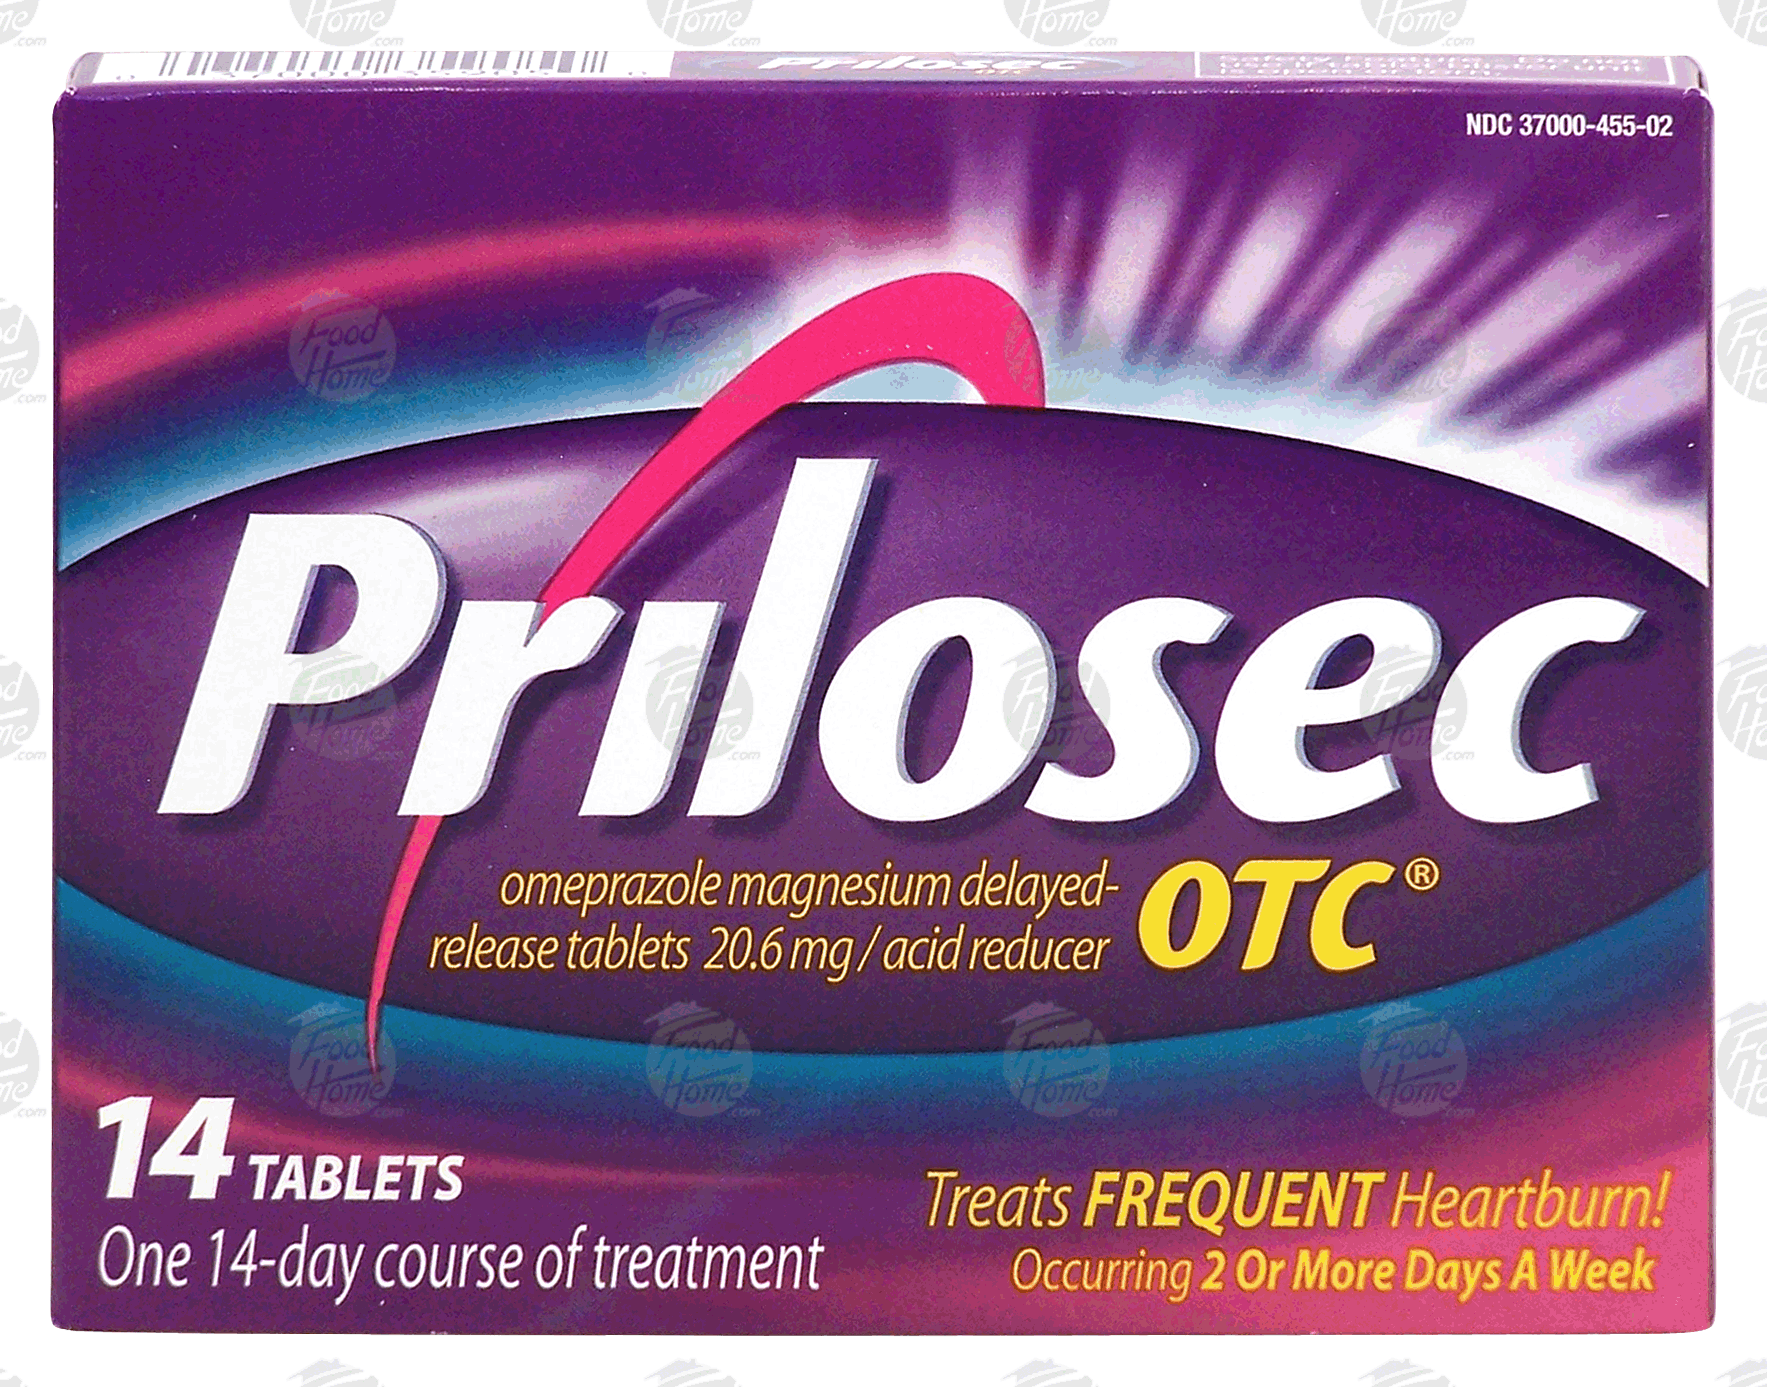 Prilosec Otc omeprazole delayed-release tablets 20.6 mg / acid reducer Full-Size Picture